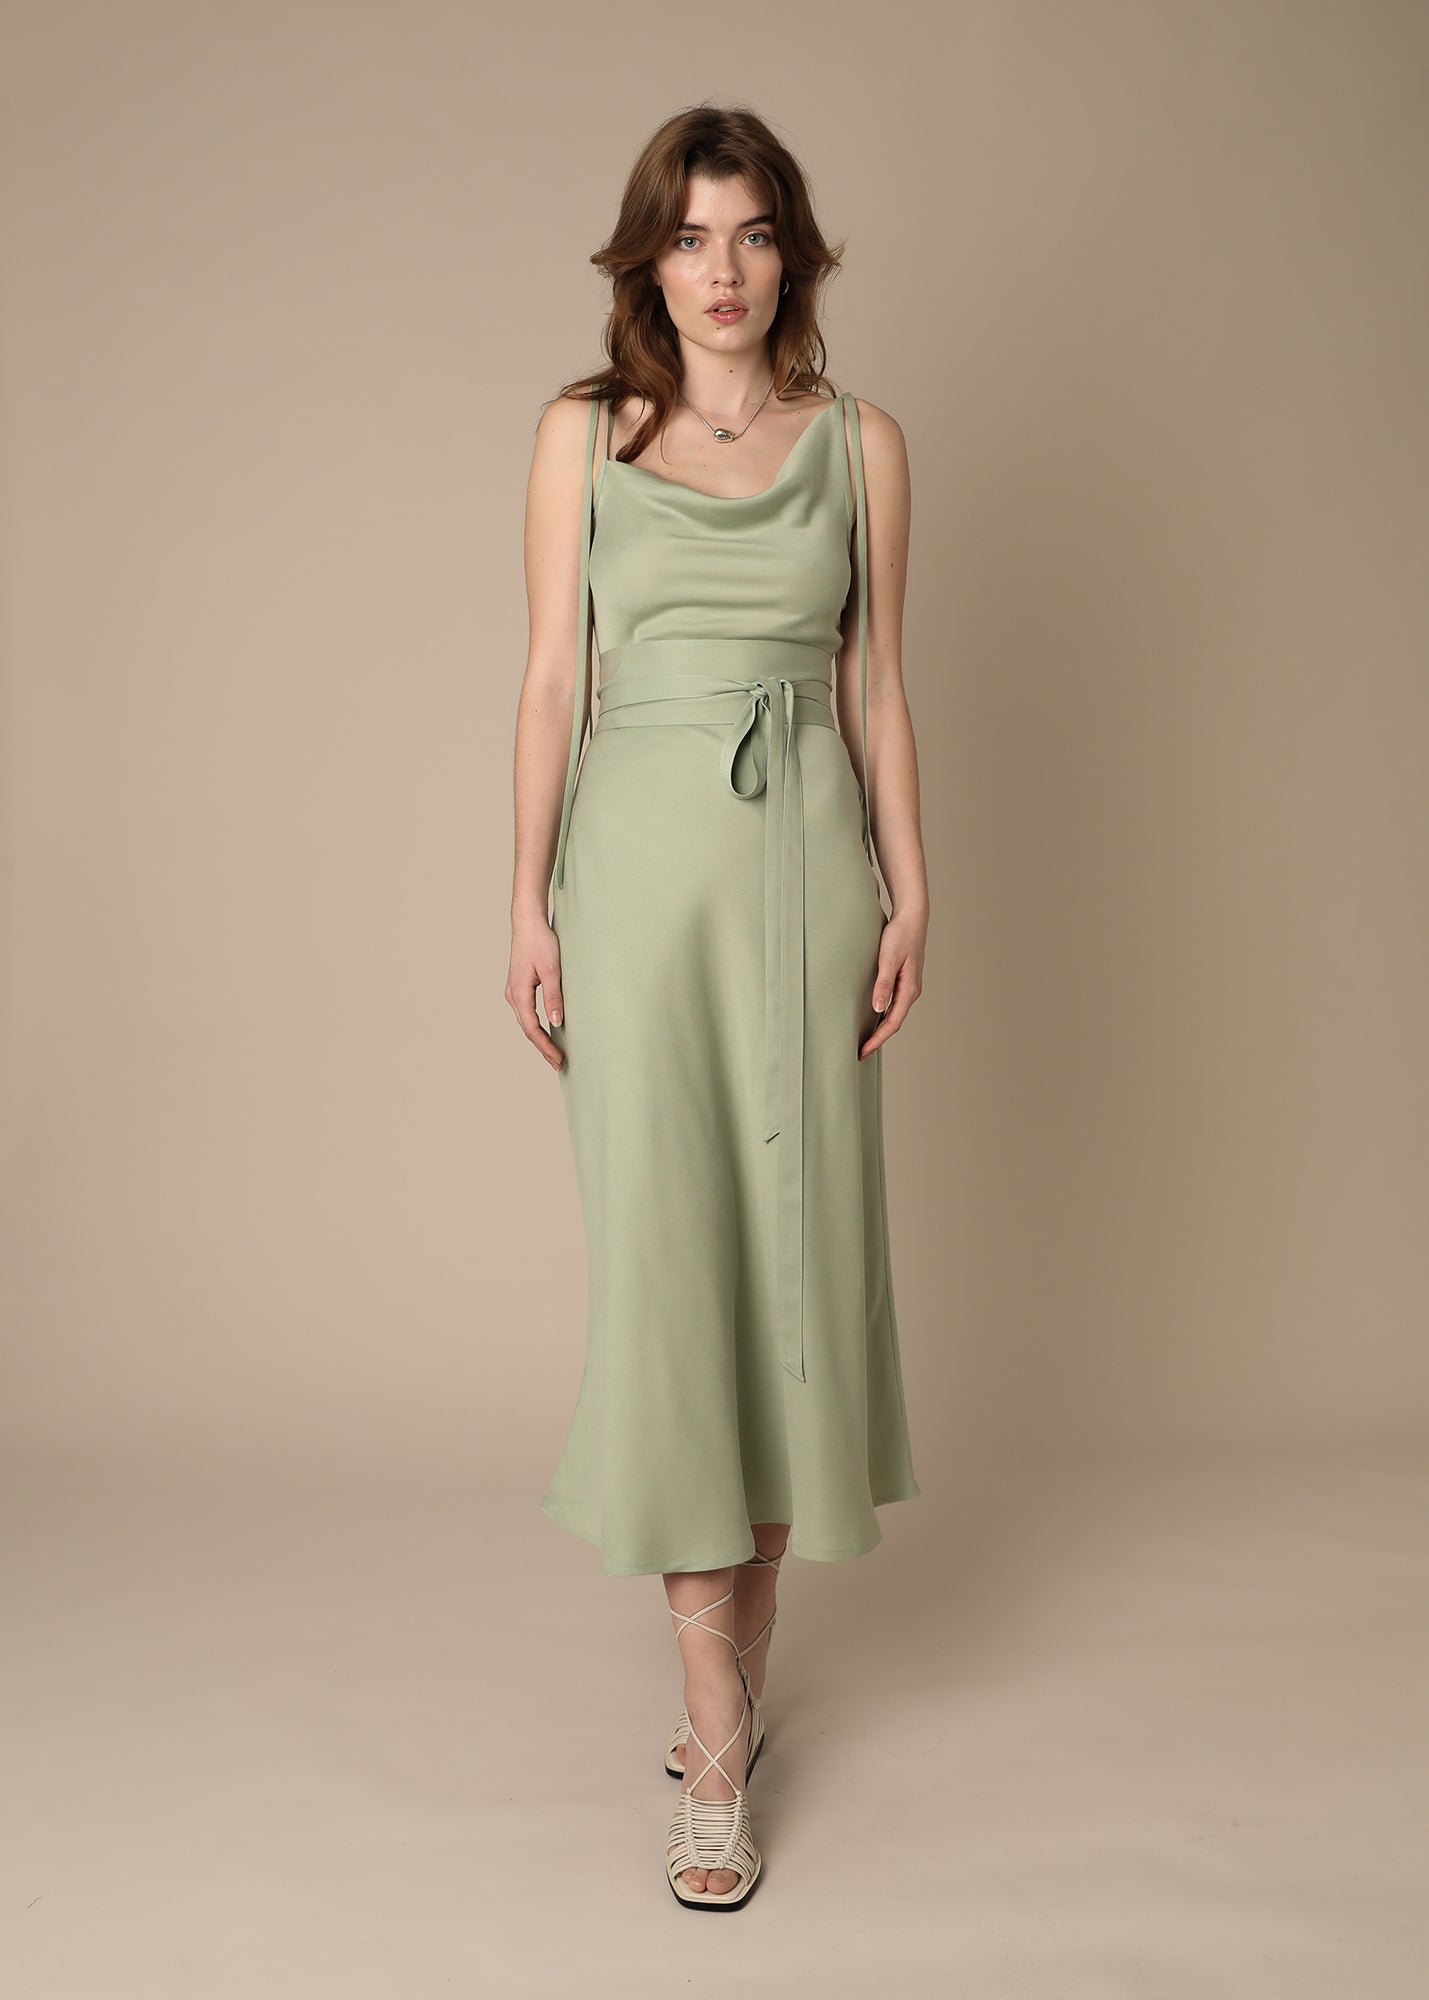 THE LUCIE DRESS SAGE GREEN - size XS/S